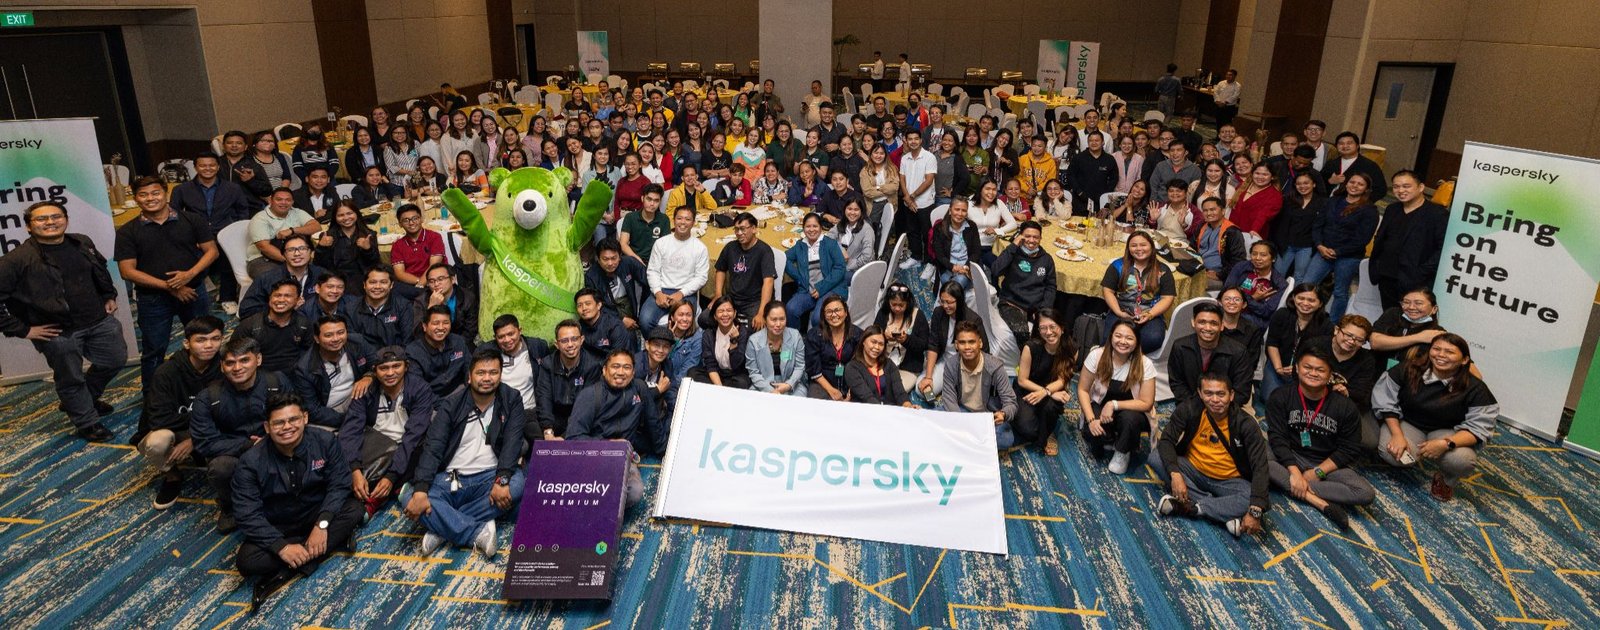 In partnership with the Department of Education (DepEd), Kaspersky recently conducted a workshop on basic cyber hygiene for educators from 71 public schools in Valenzuela City to arm them with knowledge to effectively help their students become cyber-resilient.